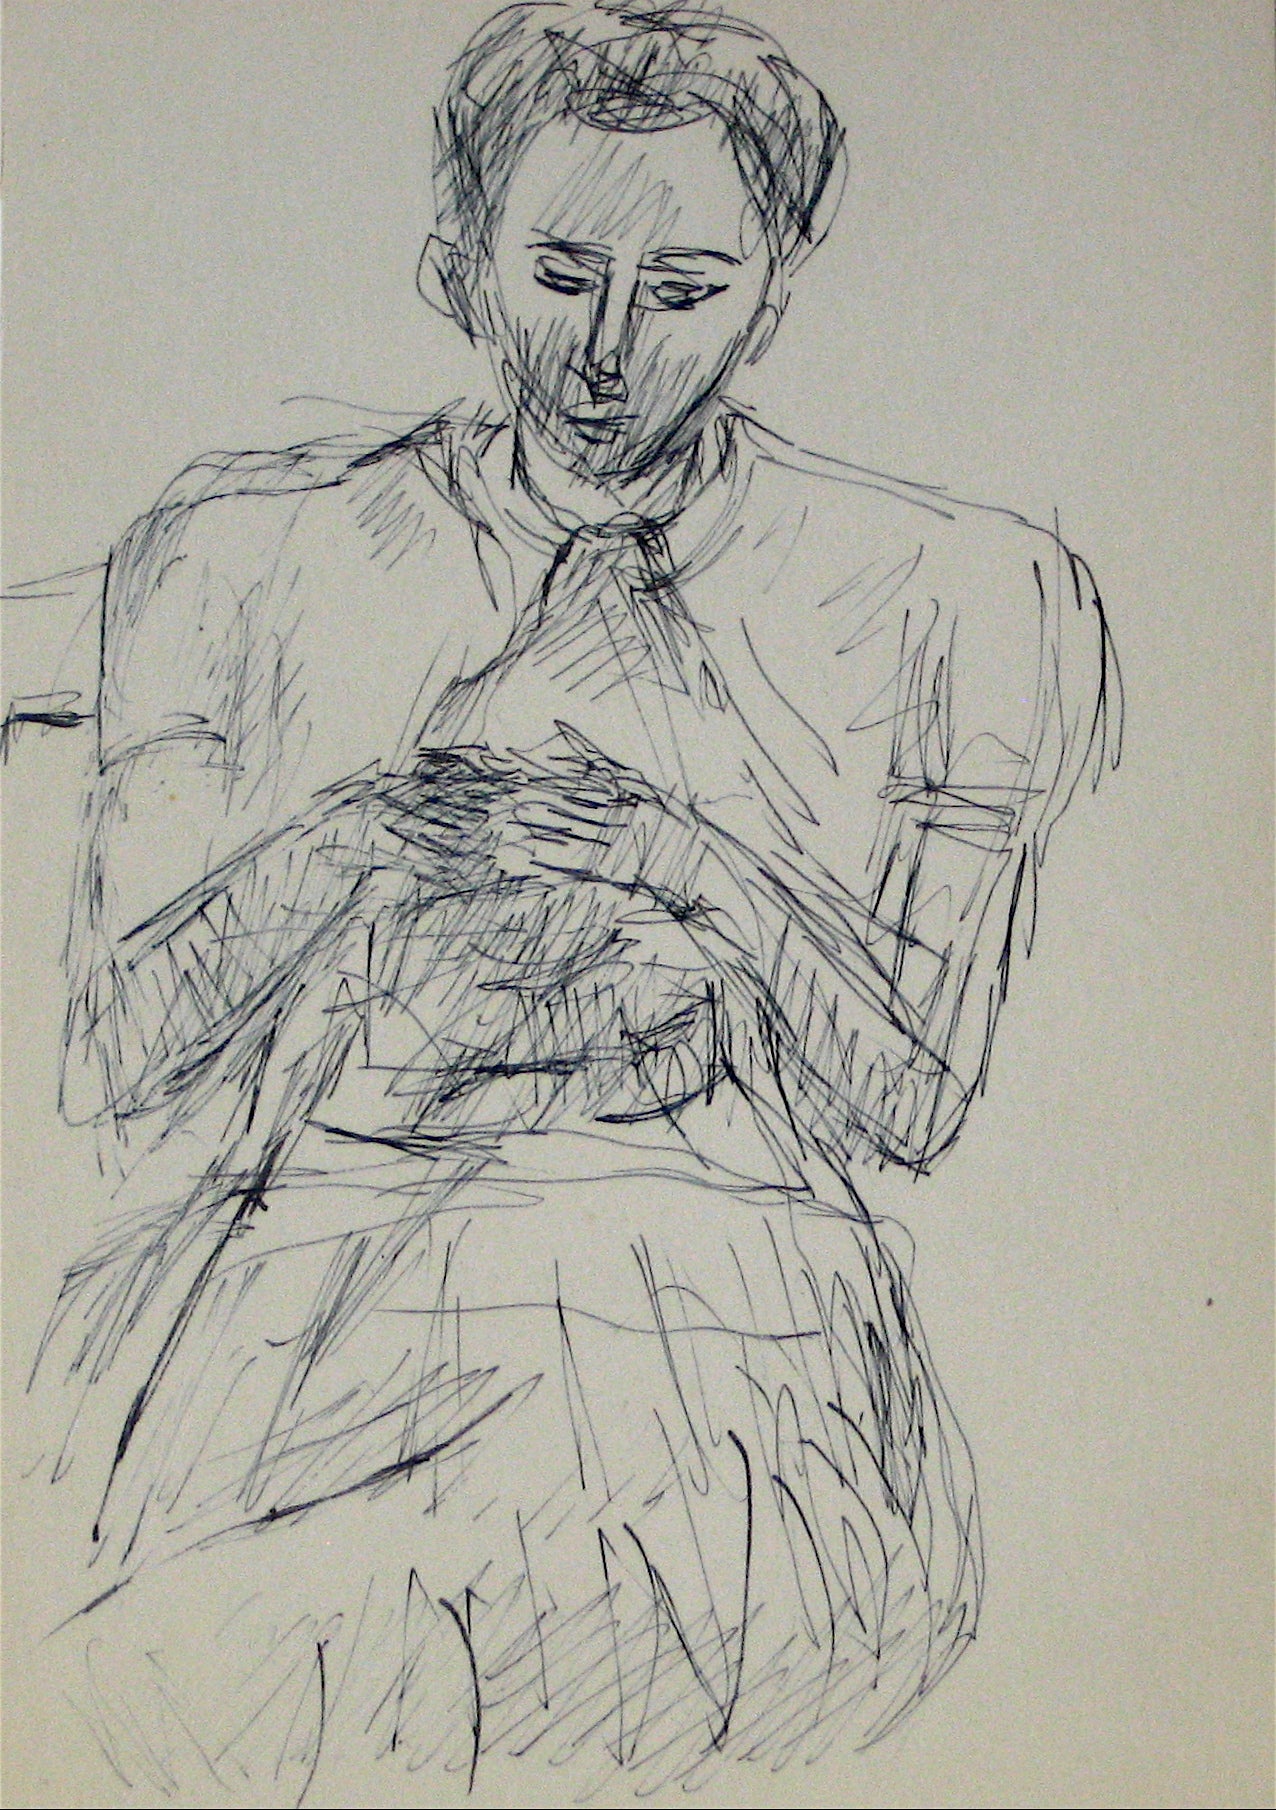 Portrait of a Seated Woman<br>Early-Mid 20th Century Ink<br><br>#12817